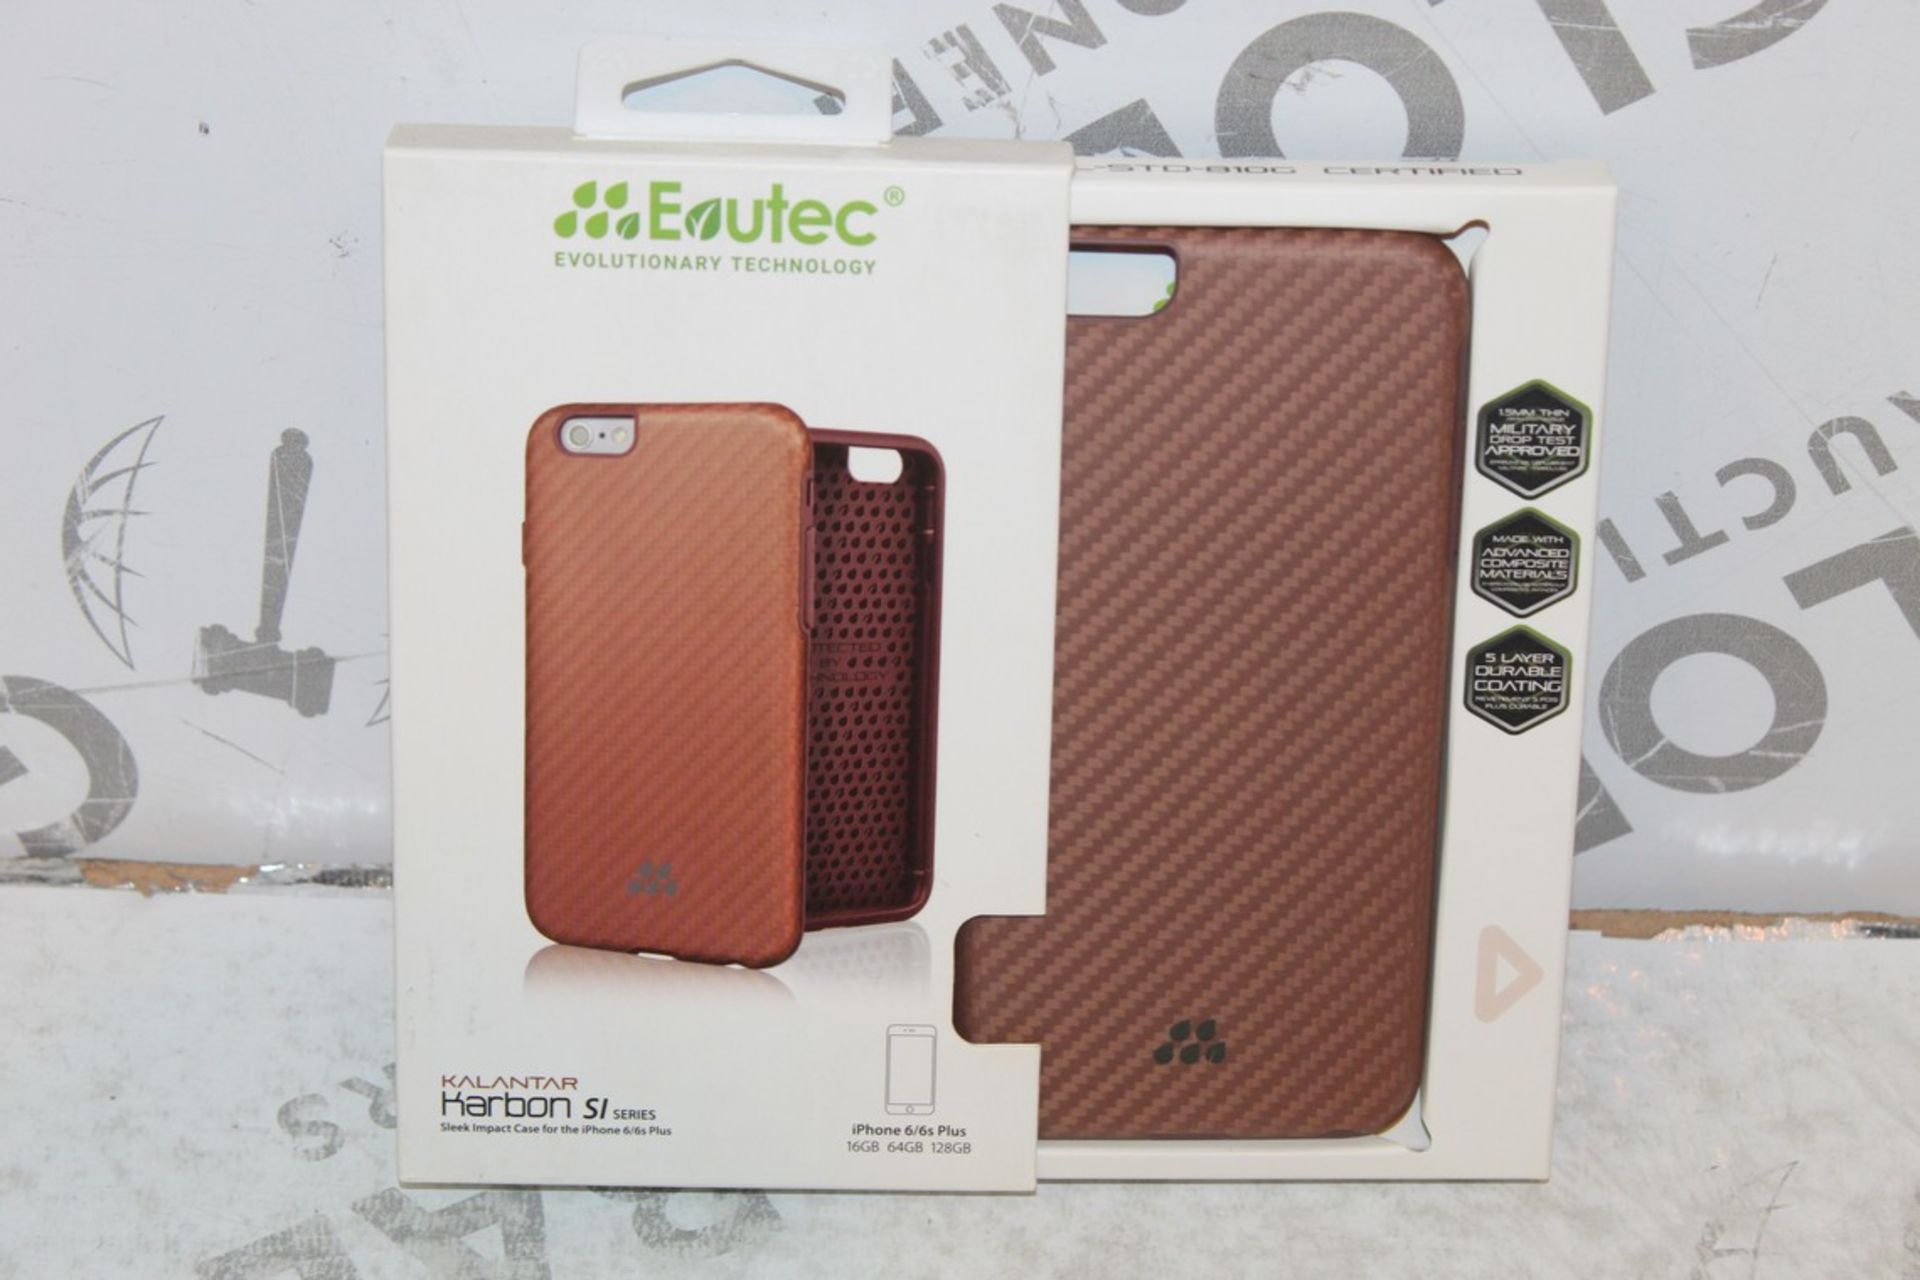 Lot to Contain 10 Brand New Assorted Evutech iPhone 5 Cases Carbon Fibre & Wood Series Combined